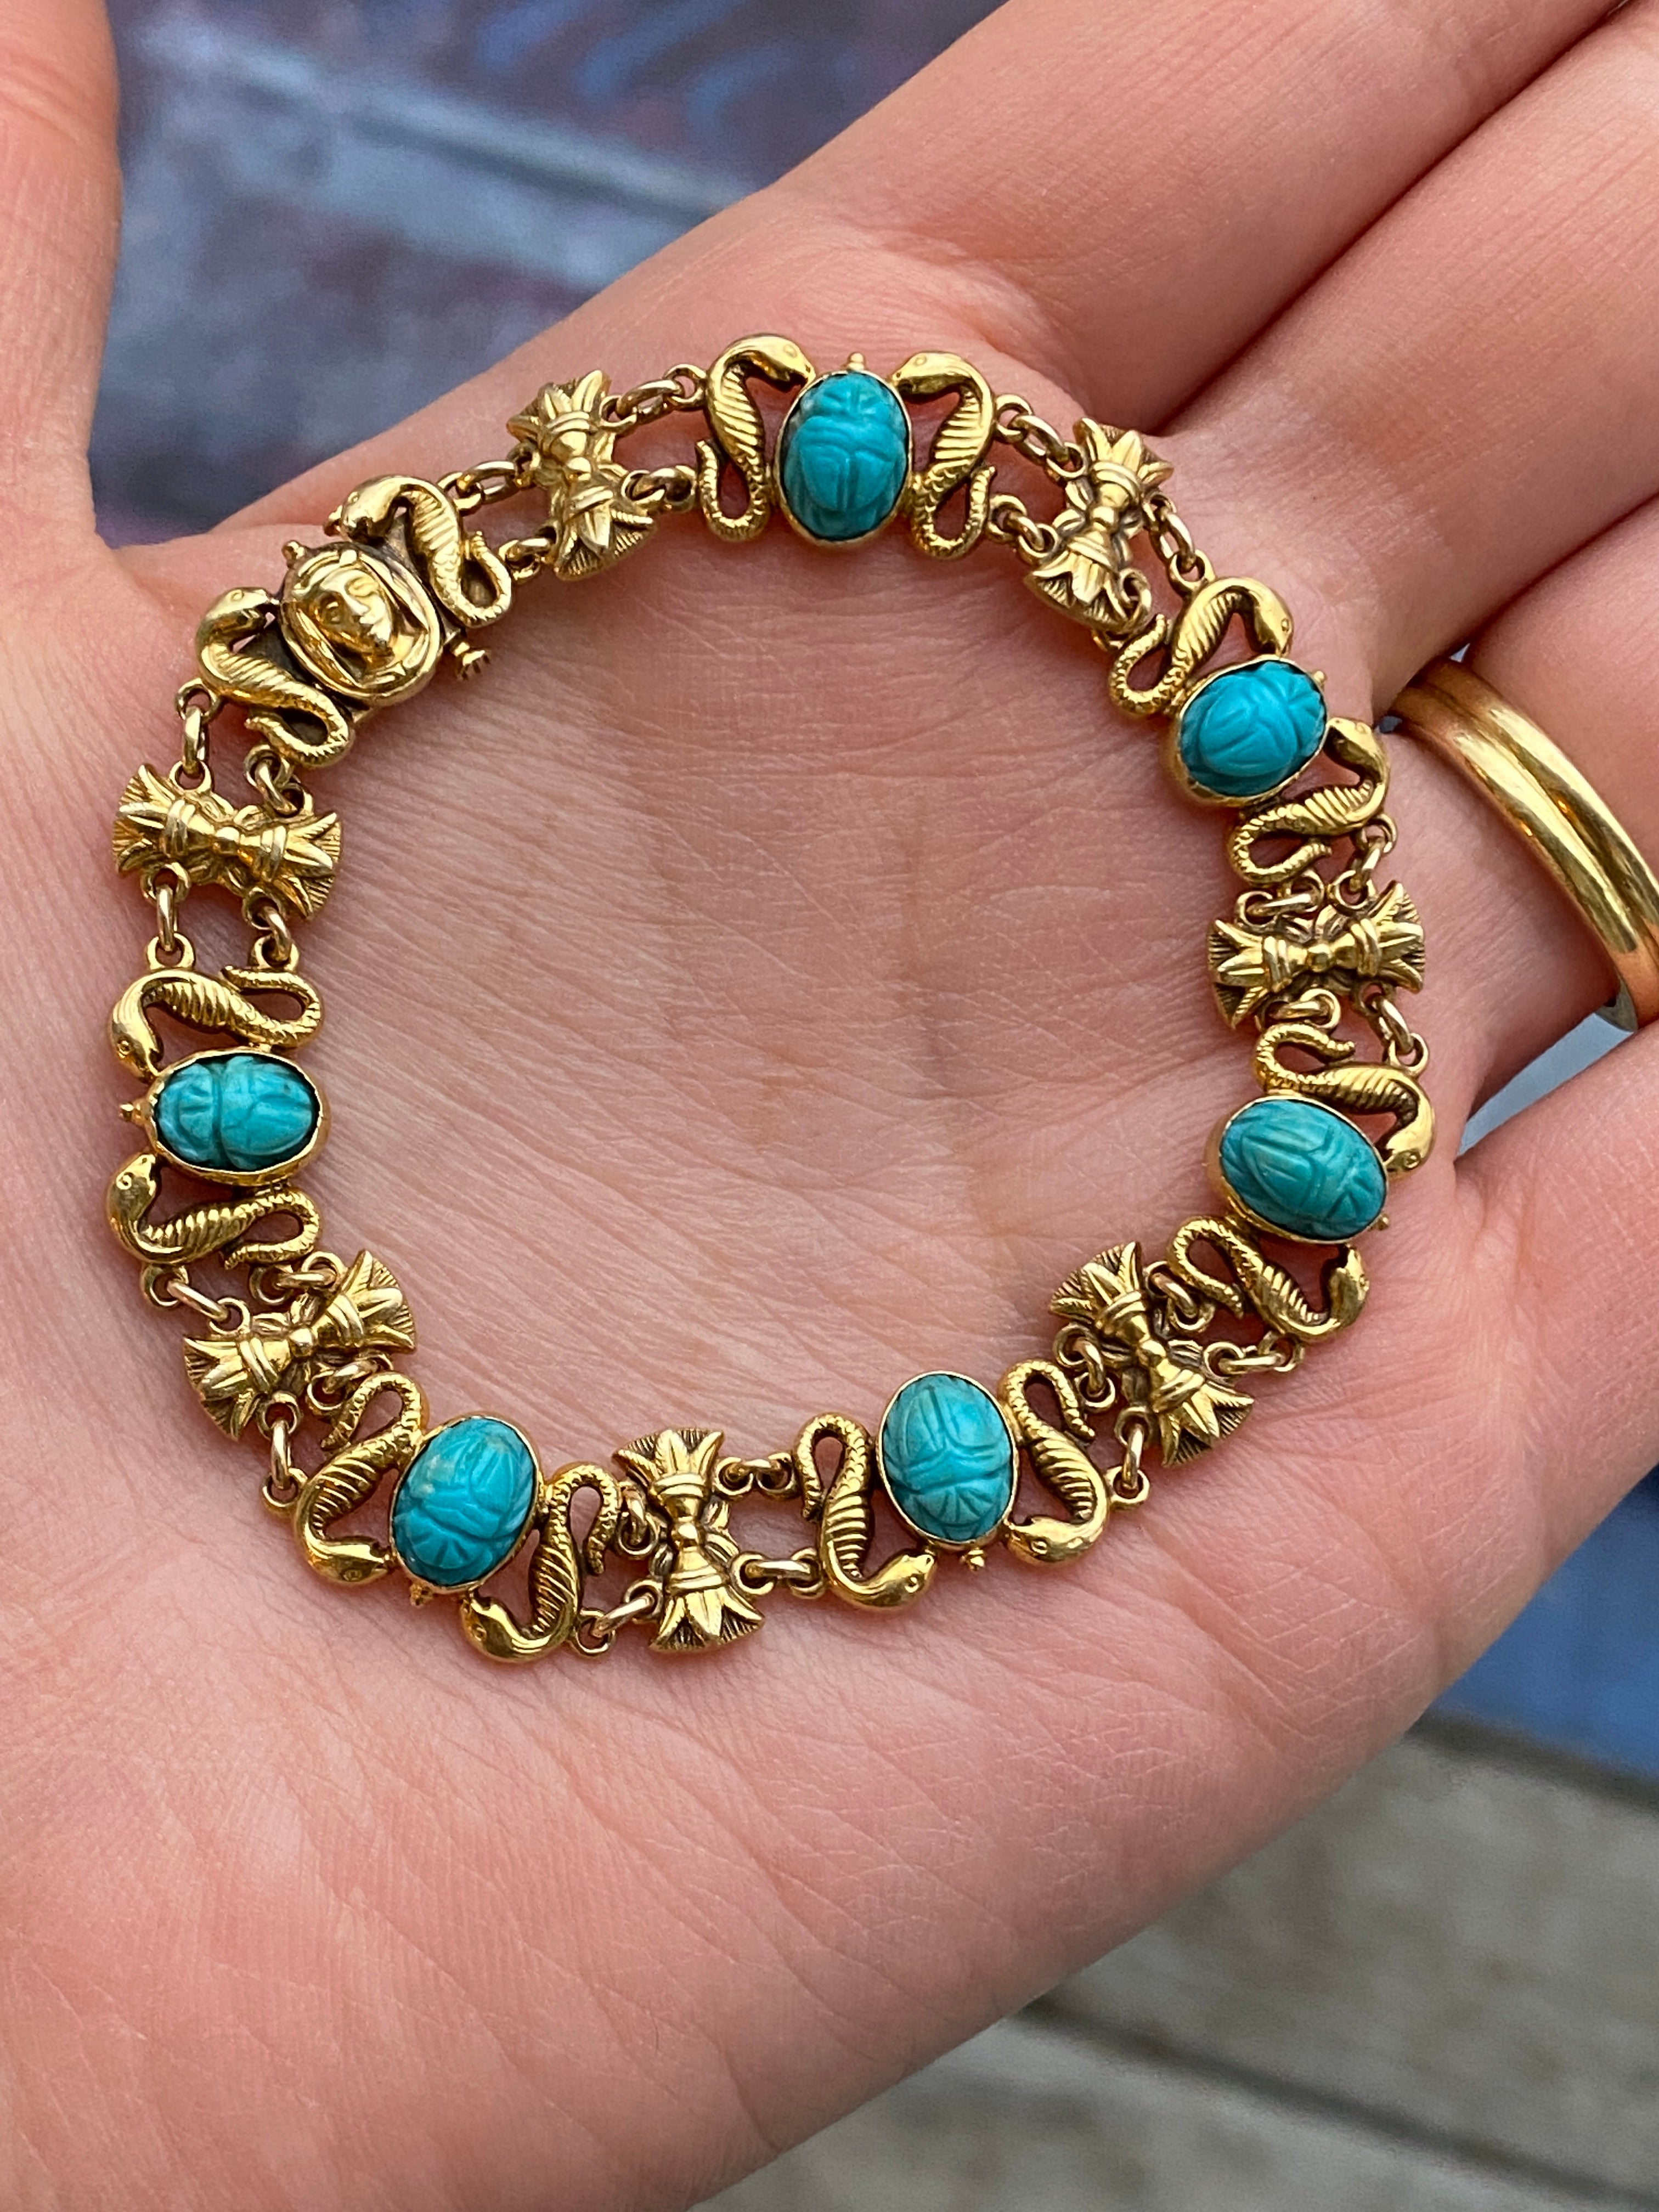 15ct Yellow Gold Turquoise Set Bracelet | Cry For The Moon